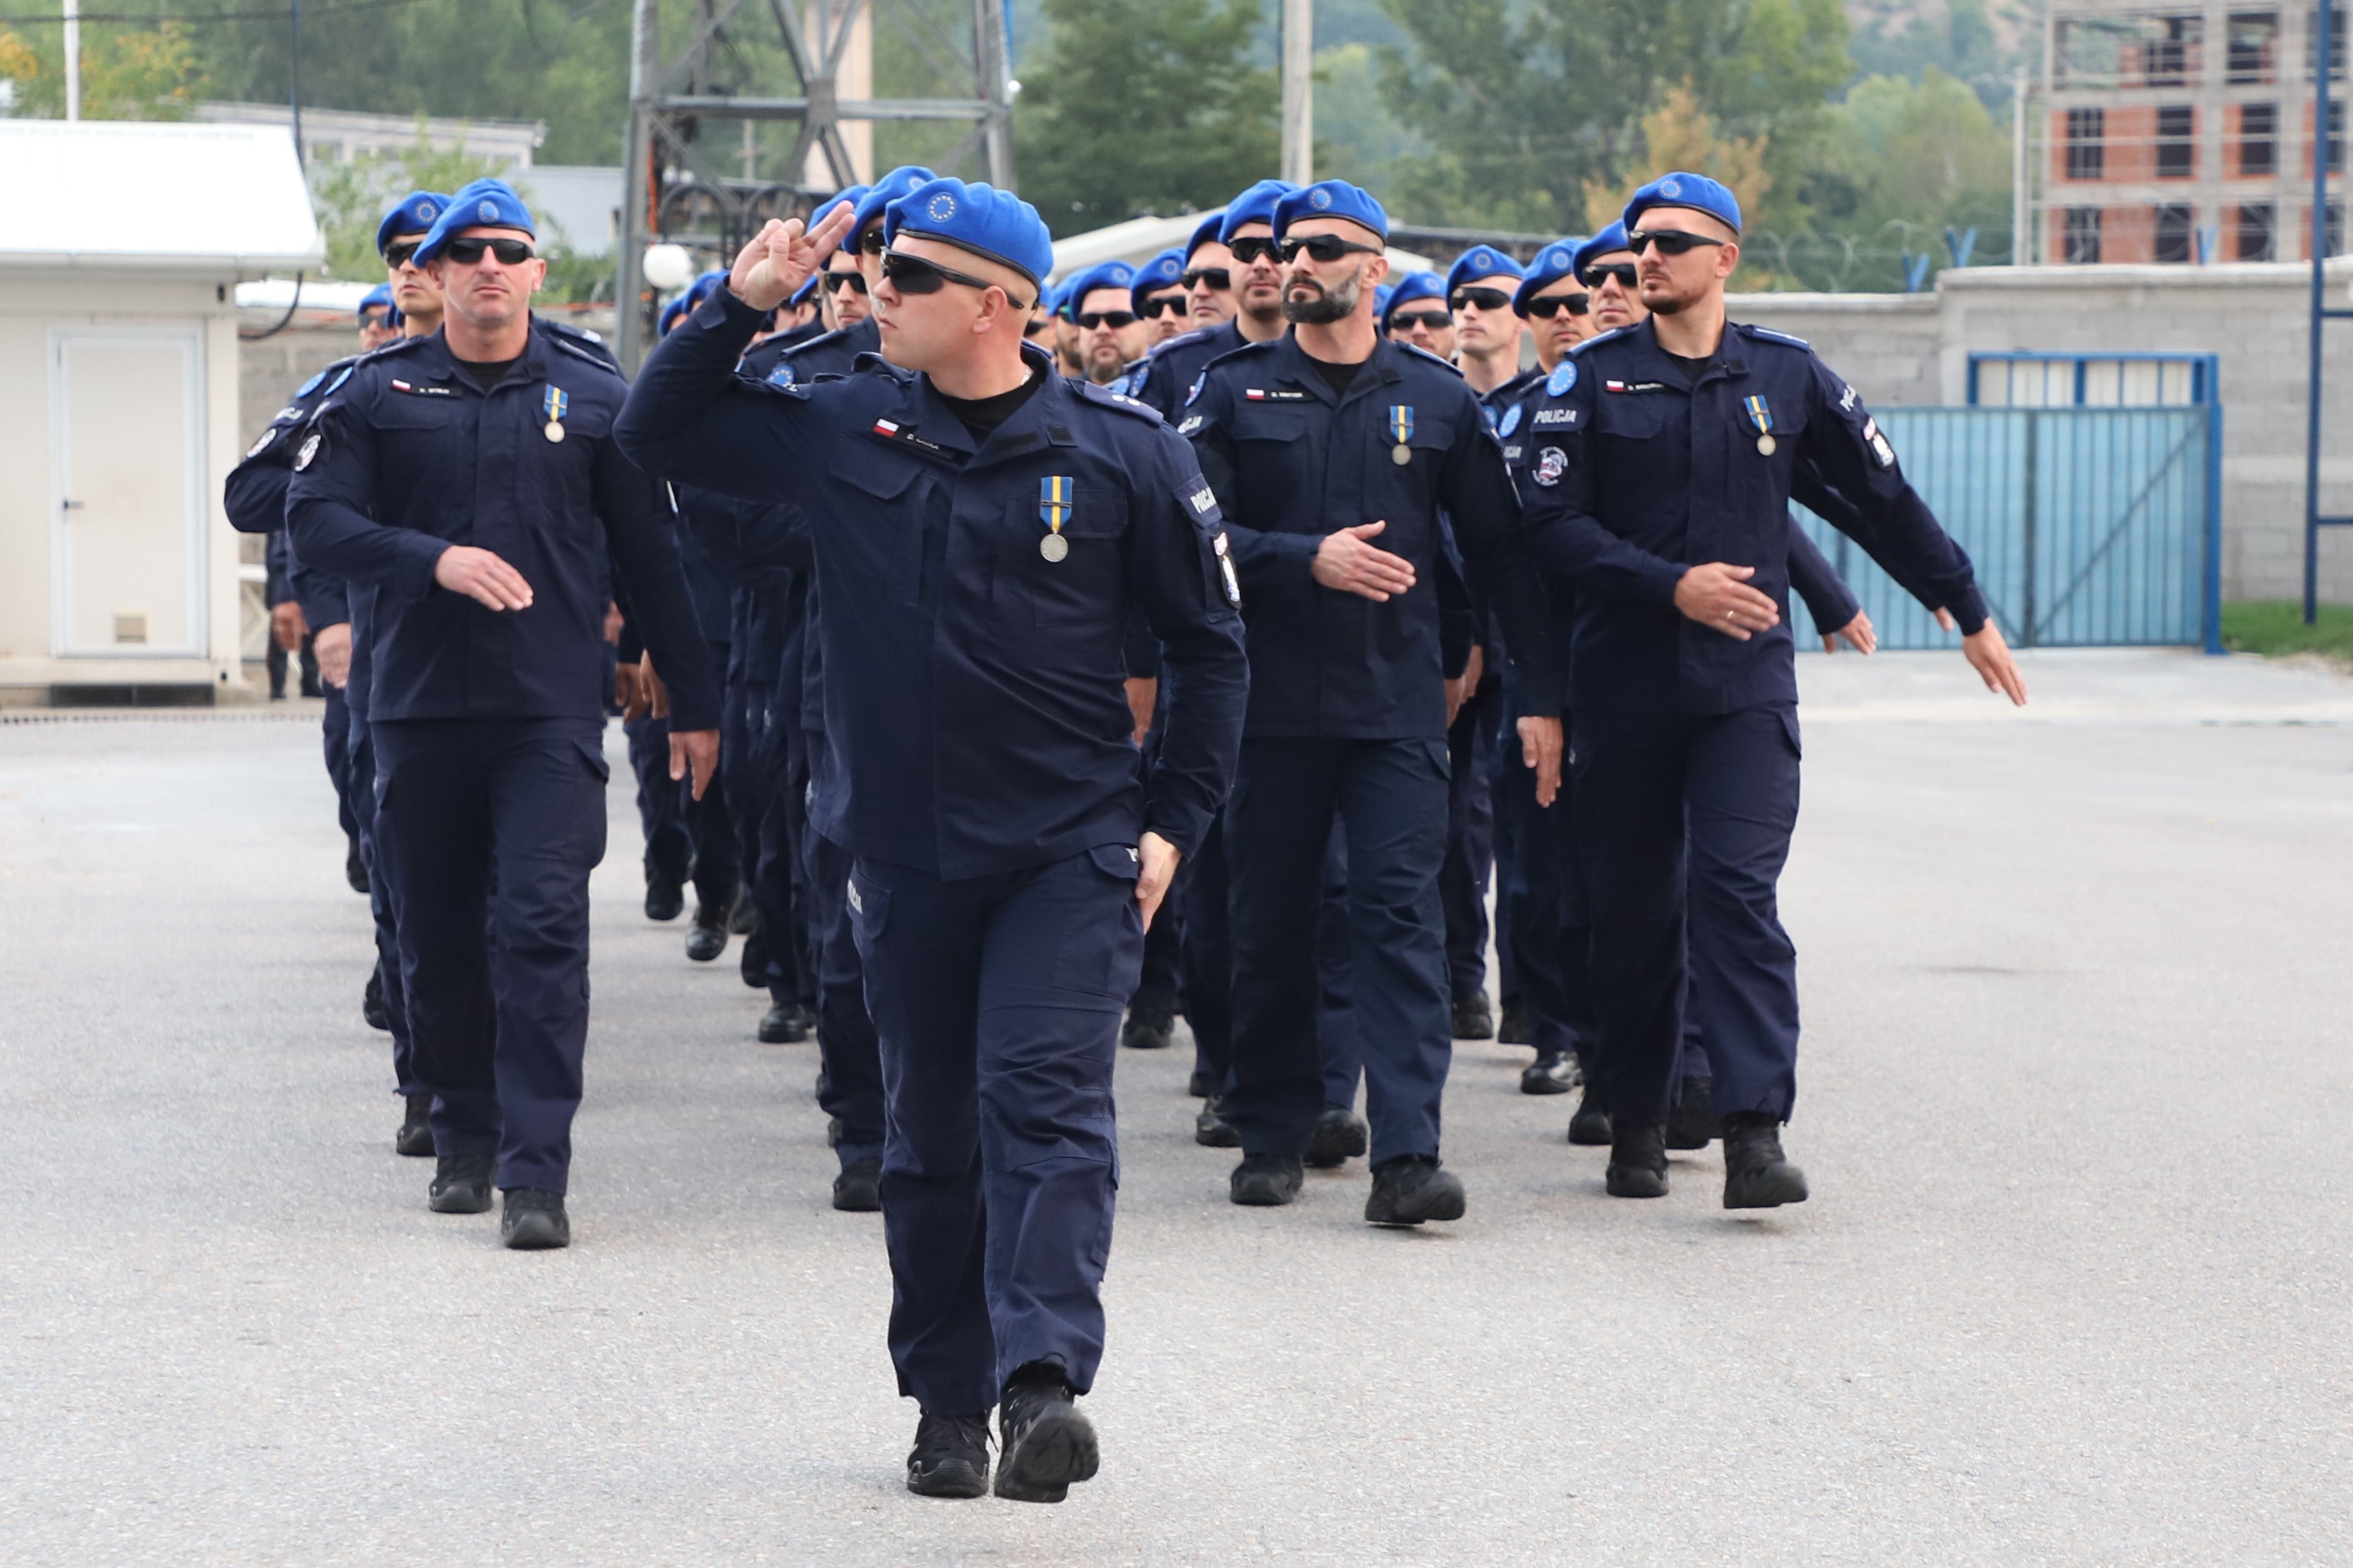 71 members of EULEX’s Formed Police Unit Awarded with the CSDP Service Medal